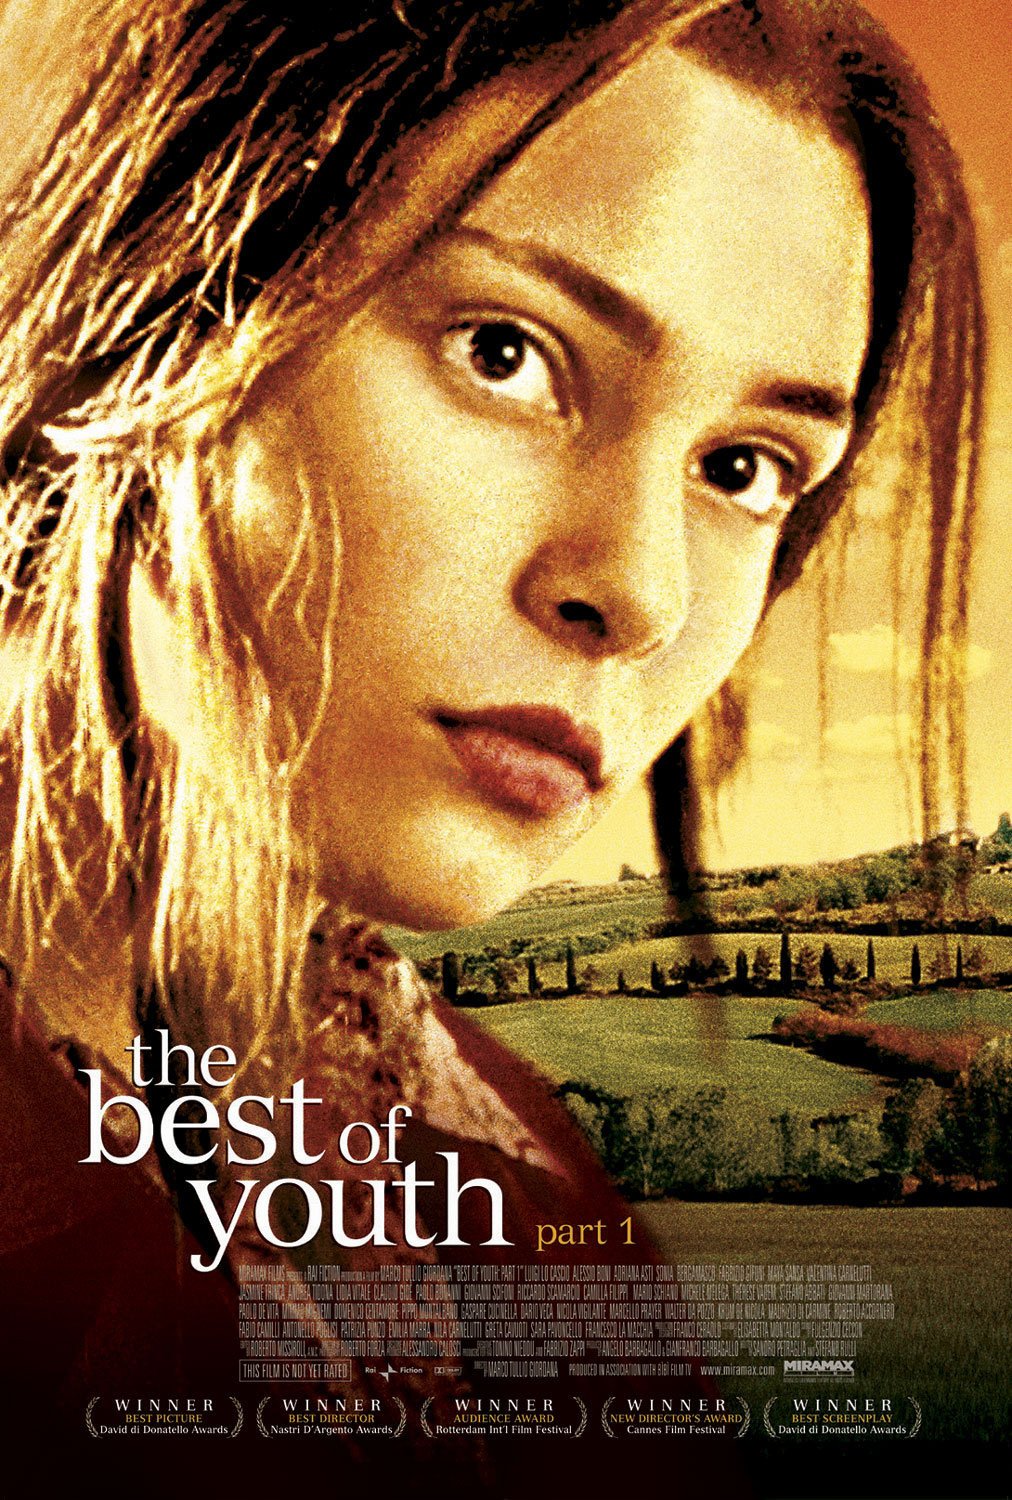 The Best of Youth (La meglio gioventÃ¹)